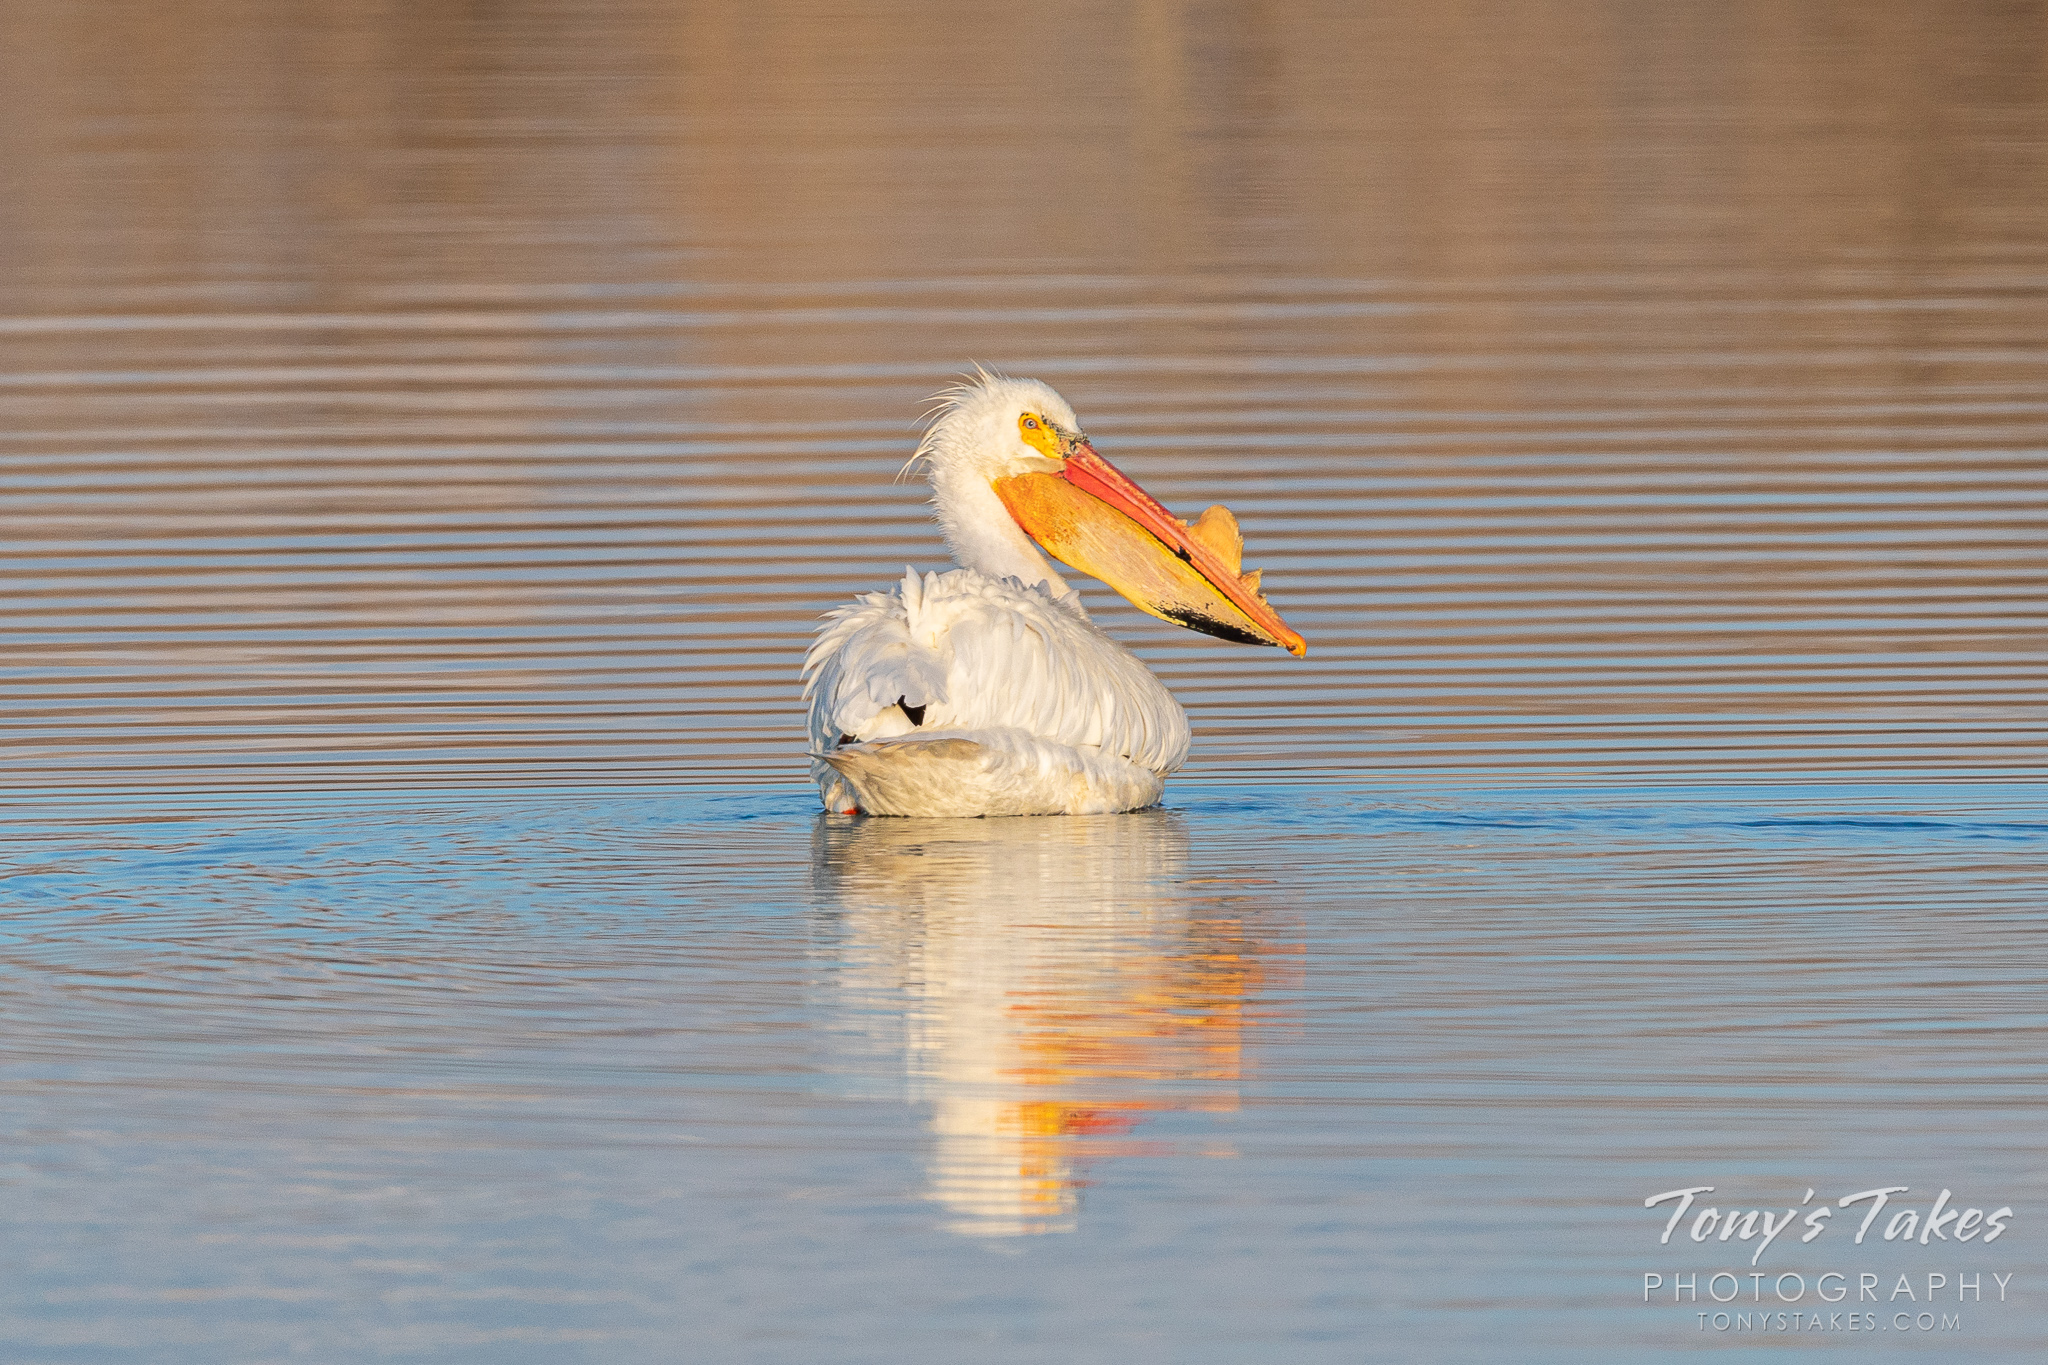 Pelican out for an early morning swim